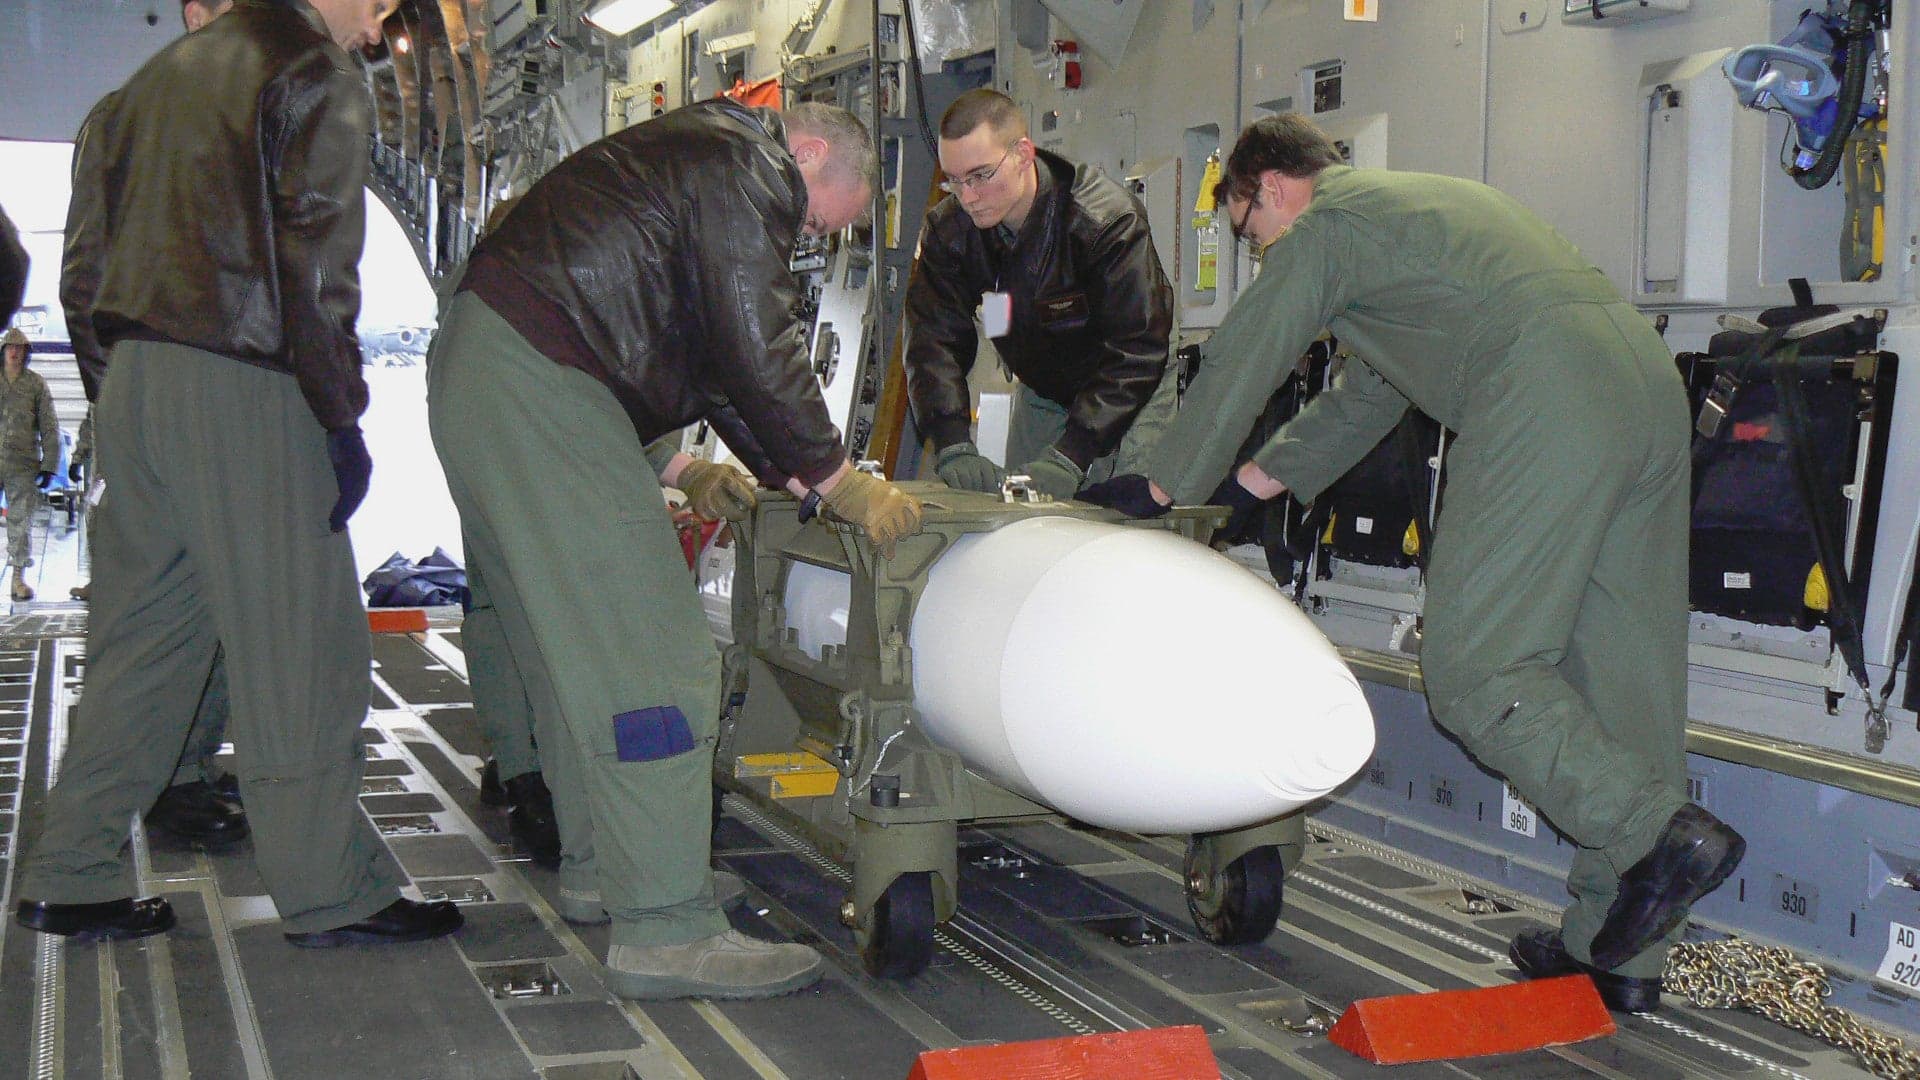 U.S. Reviewing Options For Pulling Nuclear Bombs Out Of Turkey, Here’s How They Might Do It